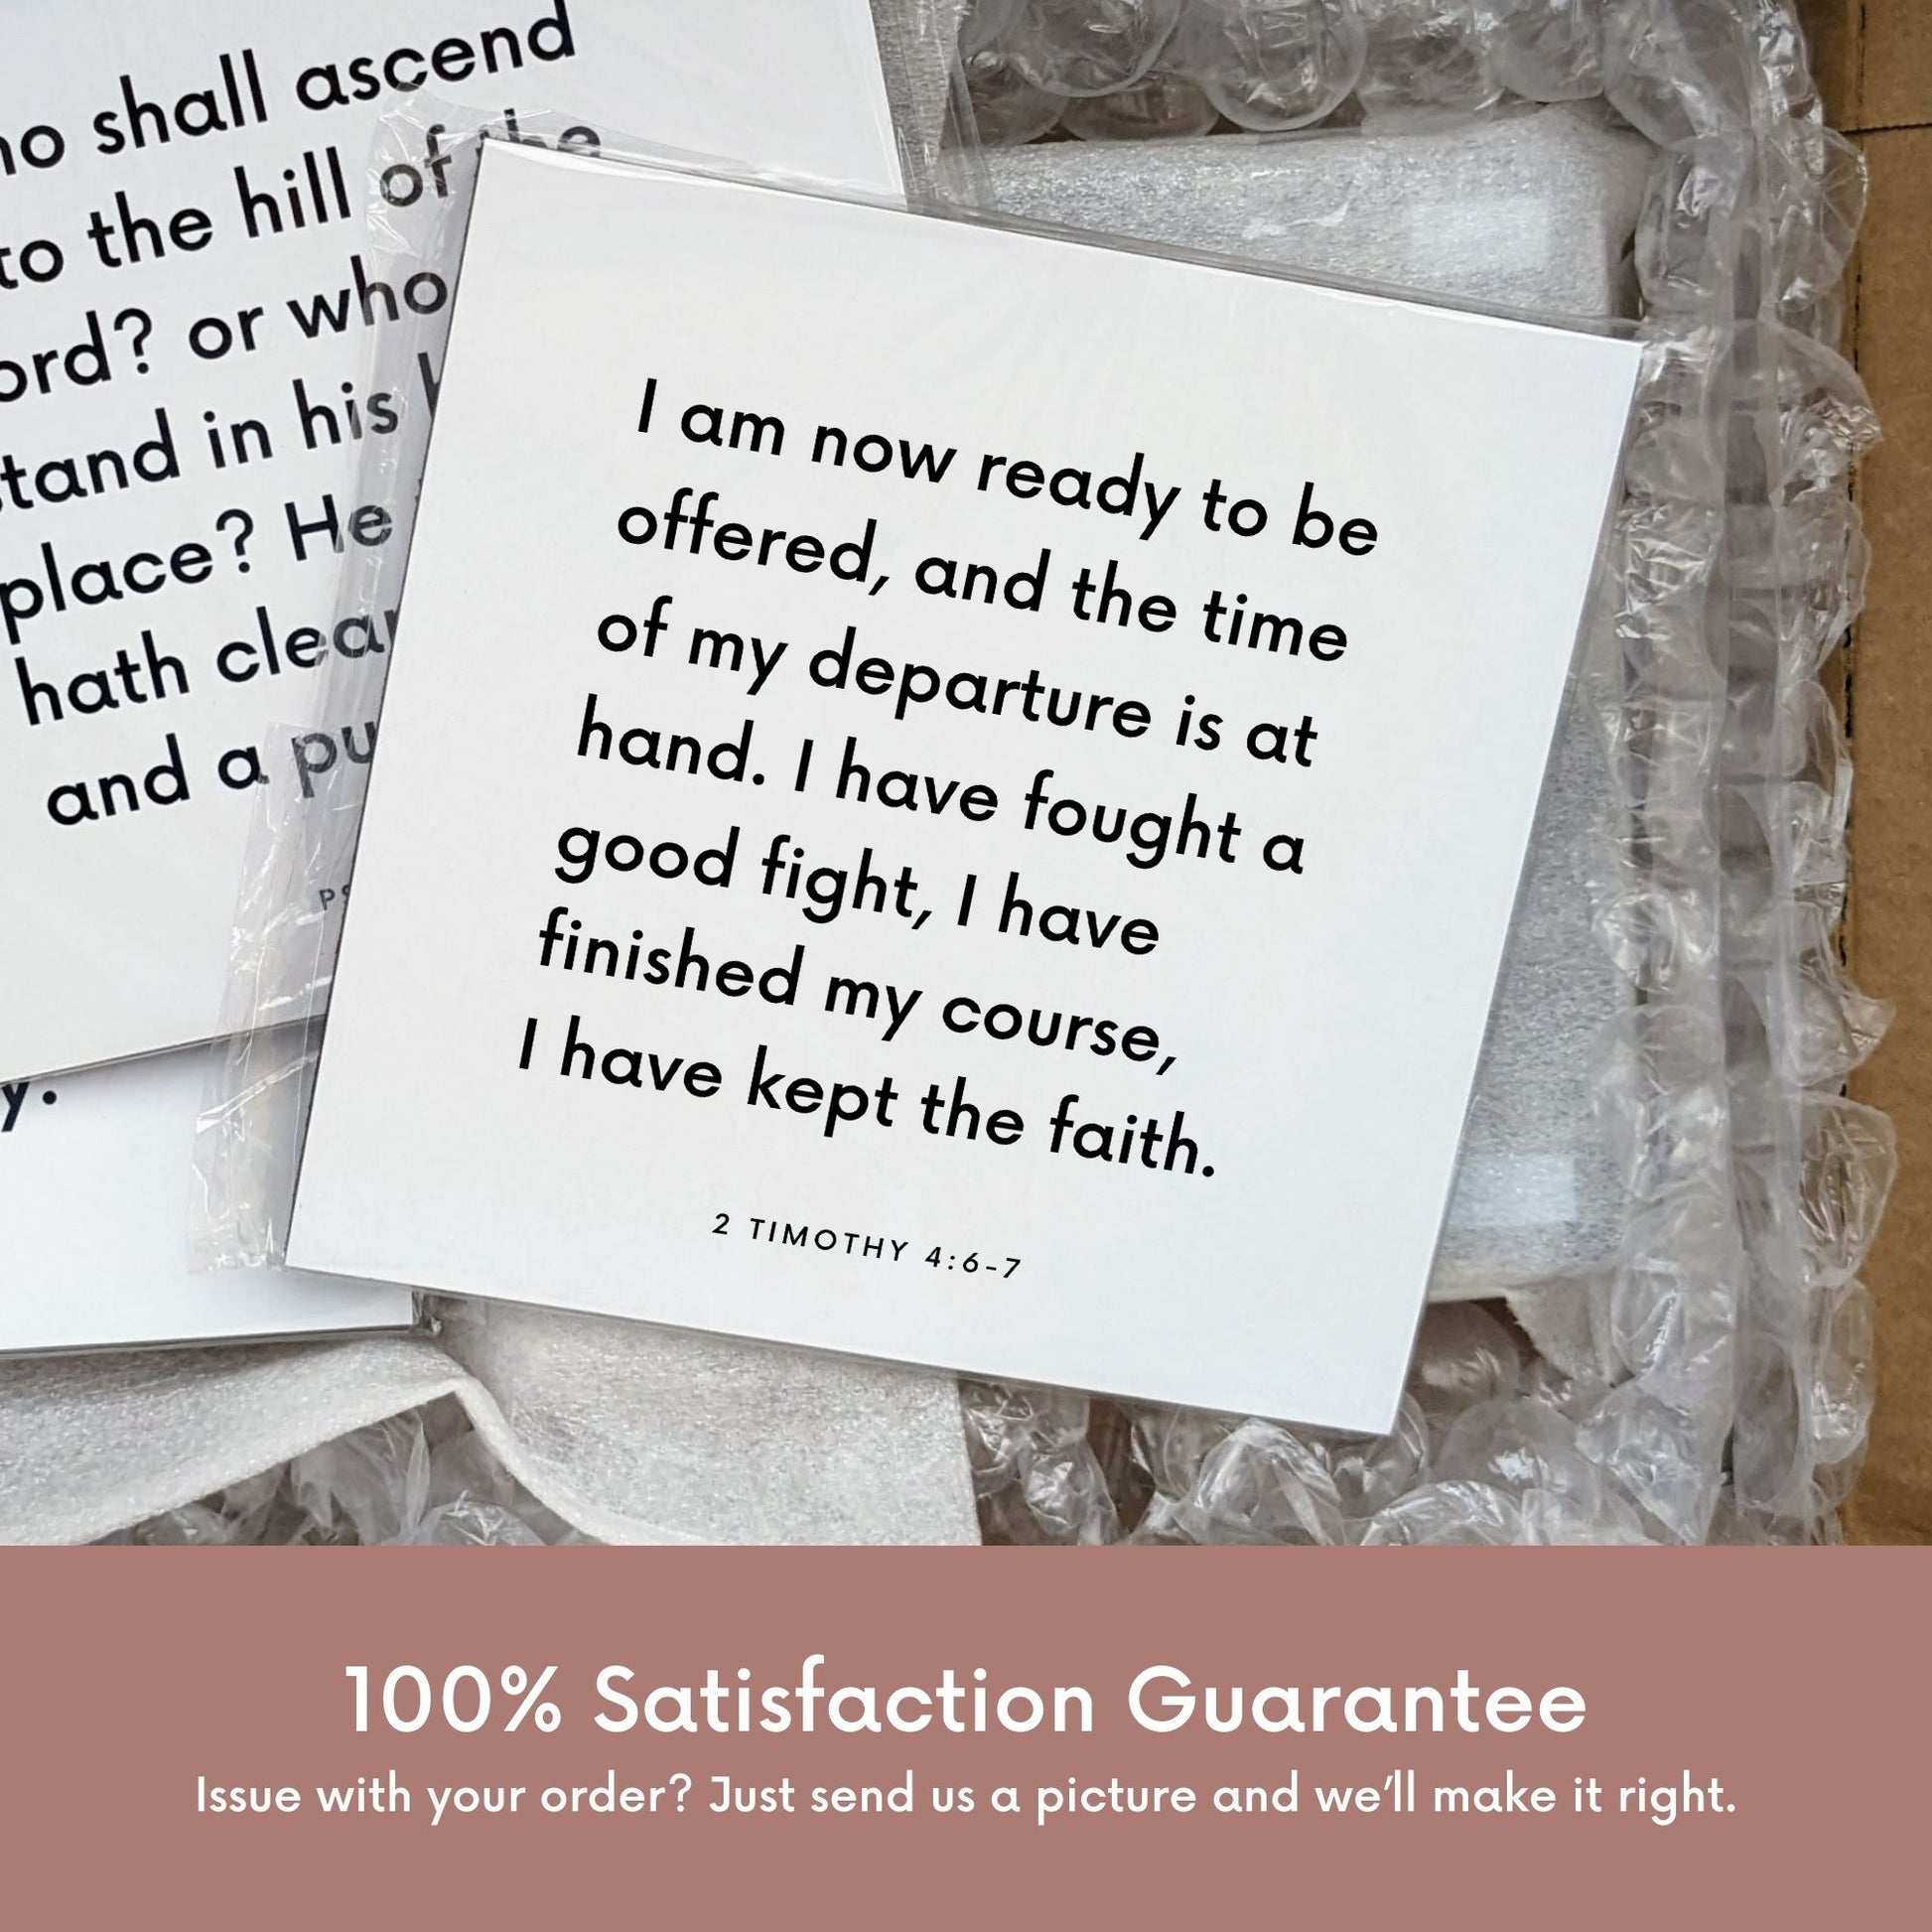 Shipping materials for scripture tile of 2 Timothy 4:6-7 - "I have fought a good fight, I have kept the faith"